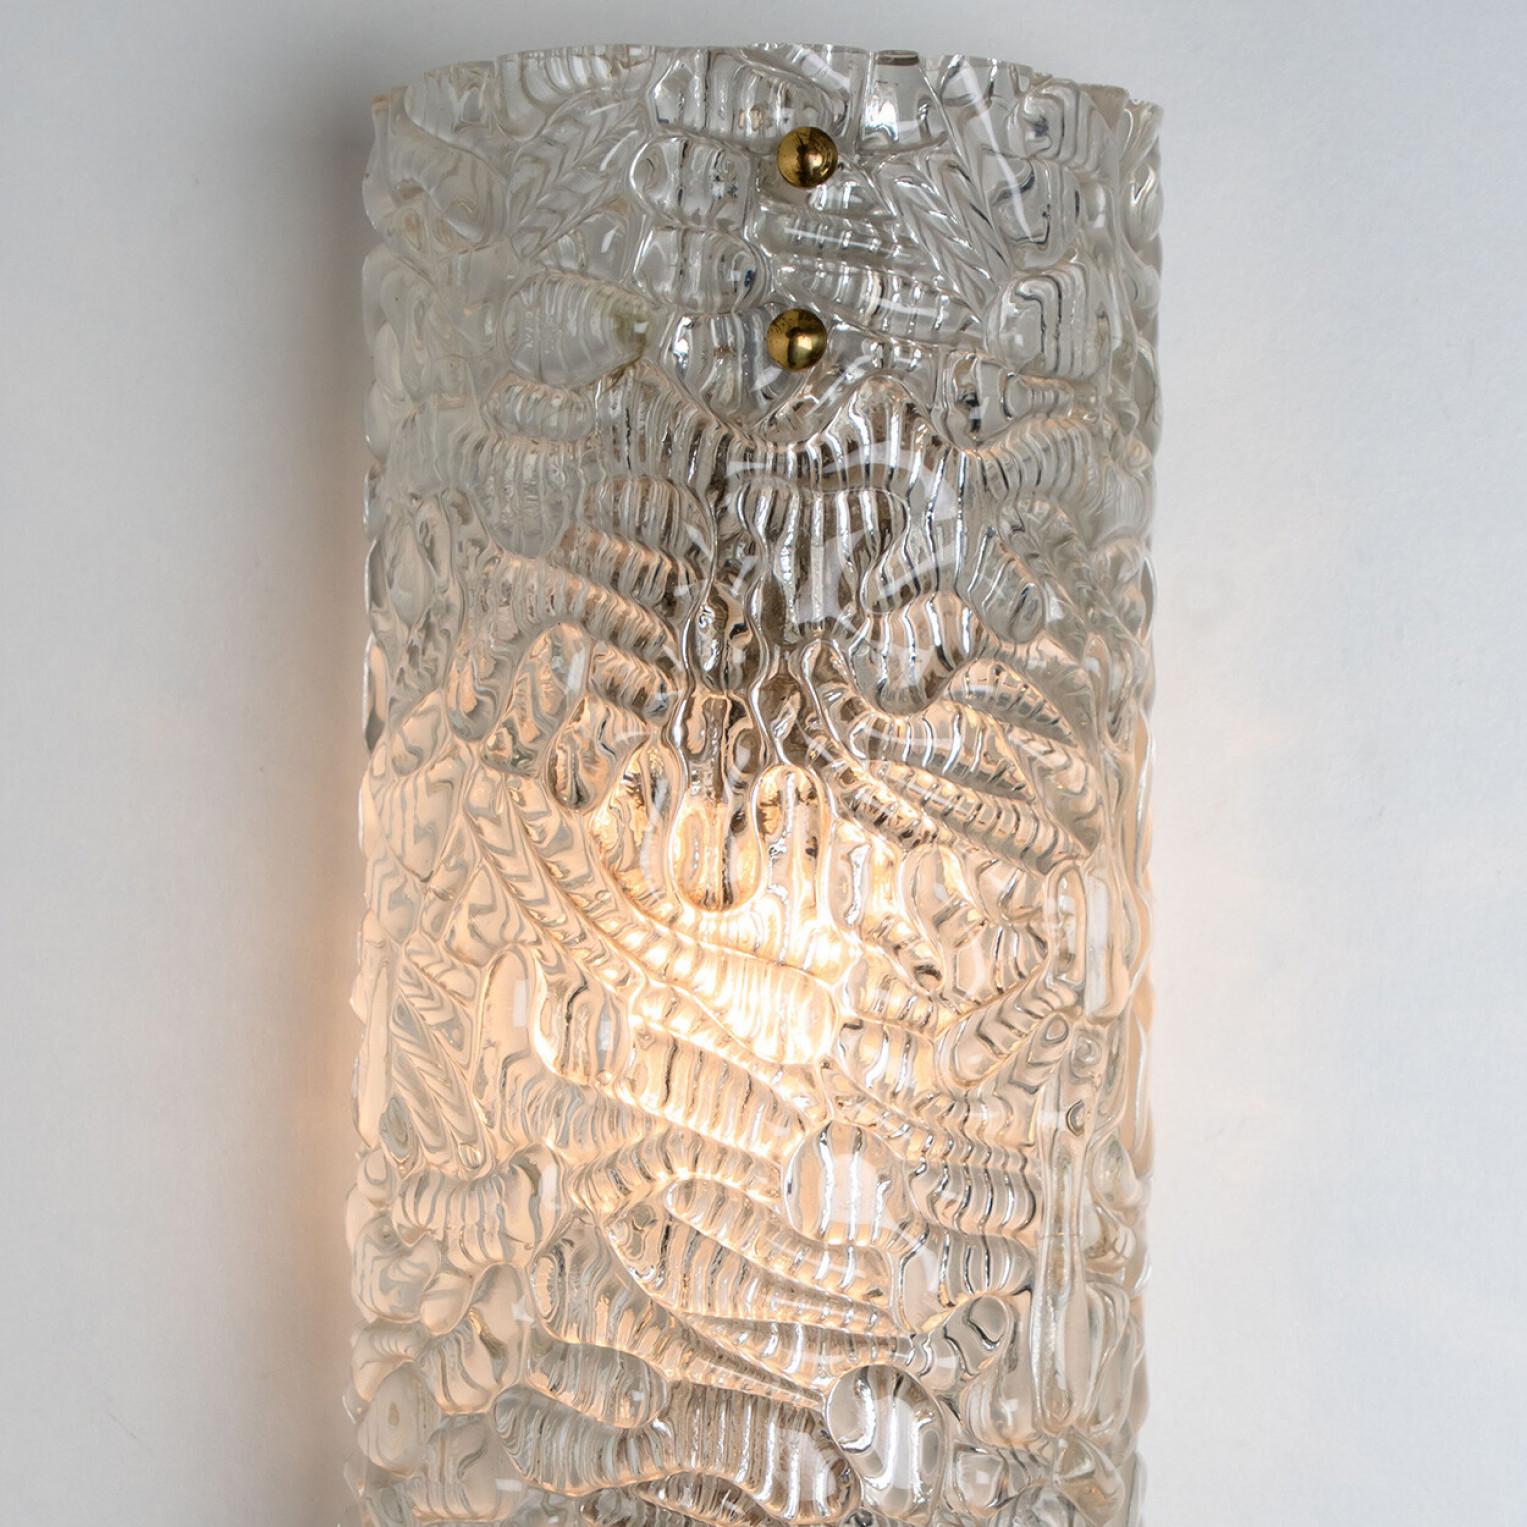 A pair of Clear Bubbled Glass Wall Light Fixtures by Hillebrand, Germany, 1960s For Sale 6